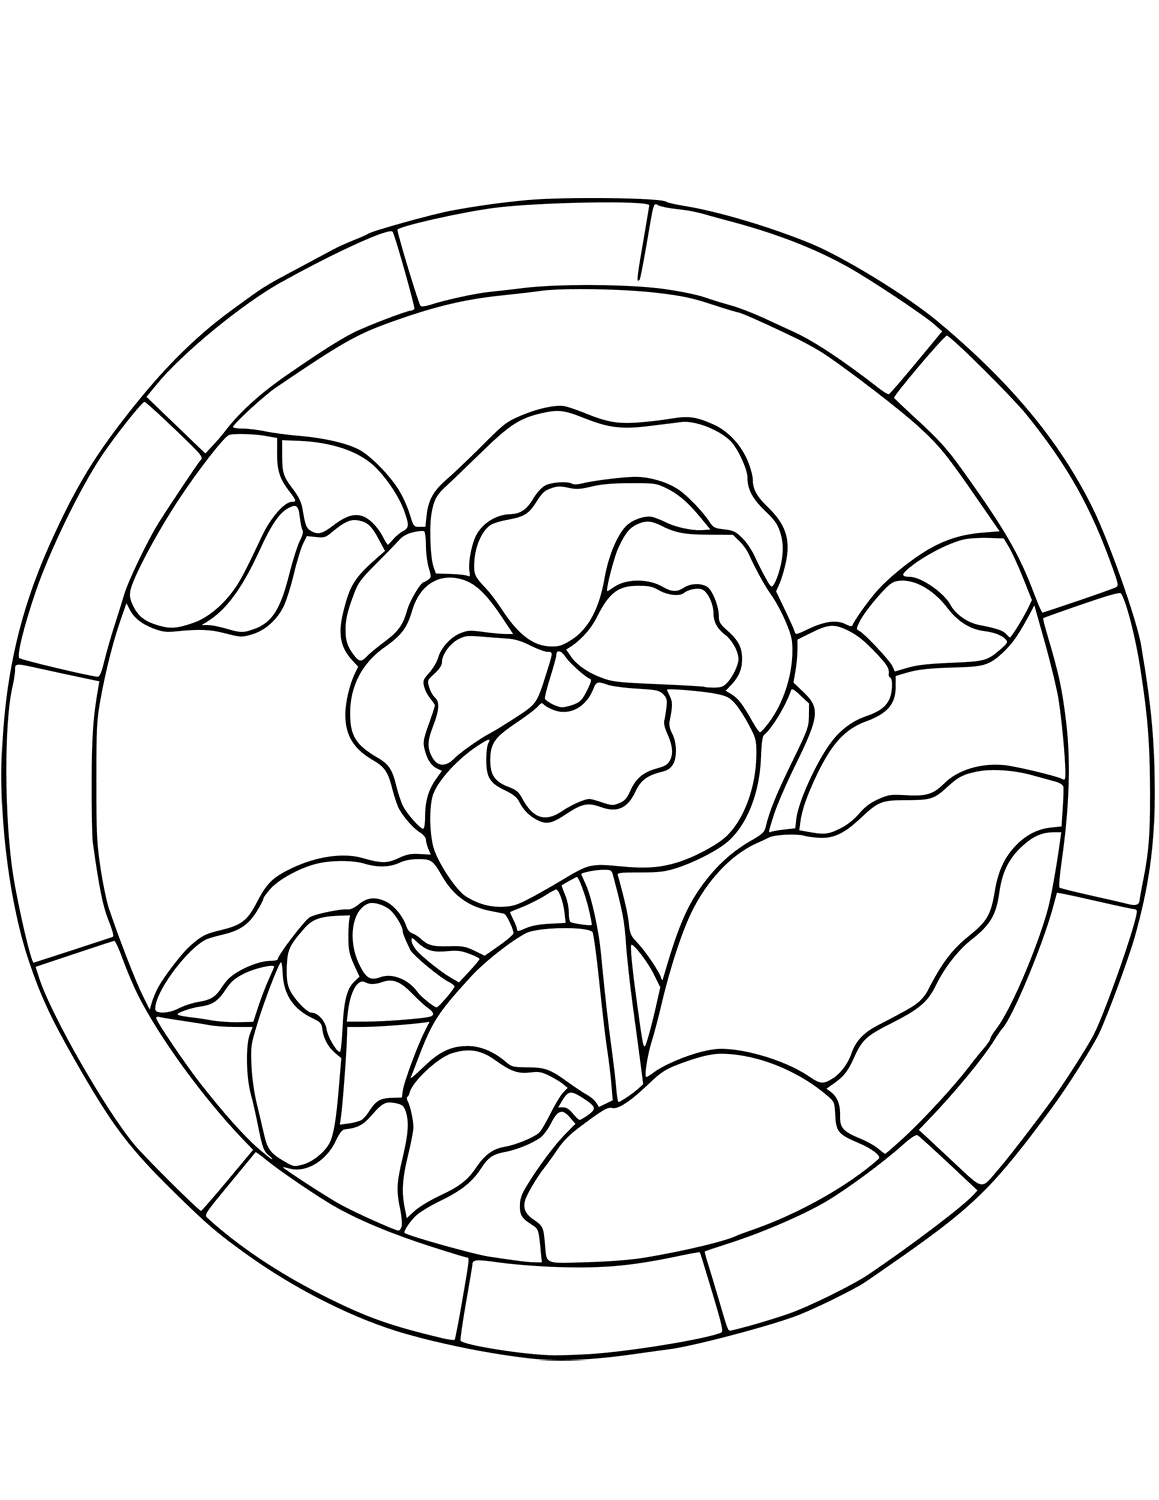 Stained Glass Pansy Flower Coloring Page Free Printable Coloring Pages For Kids